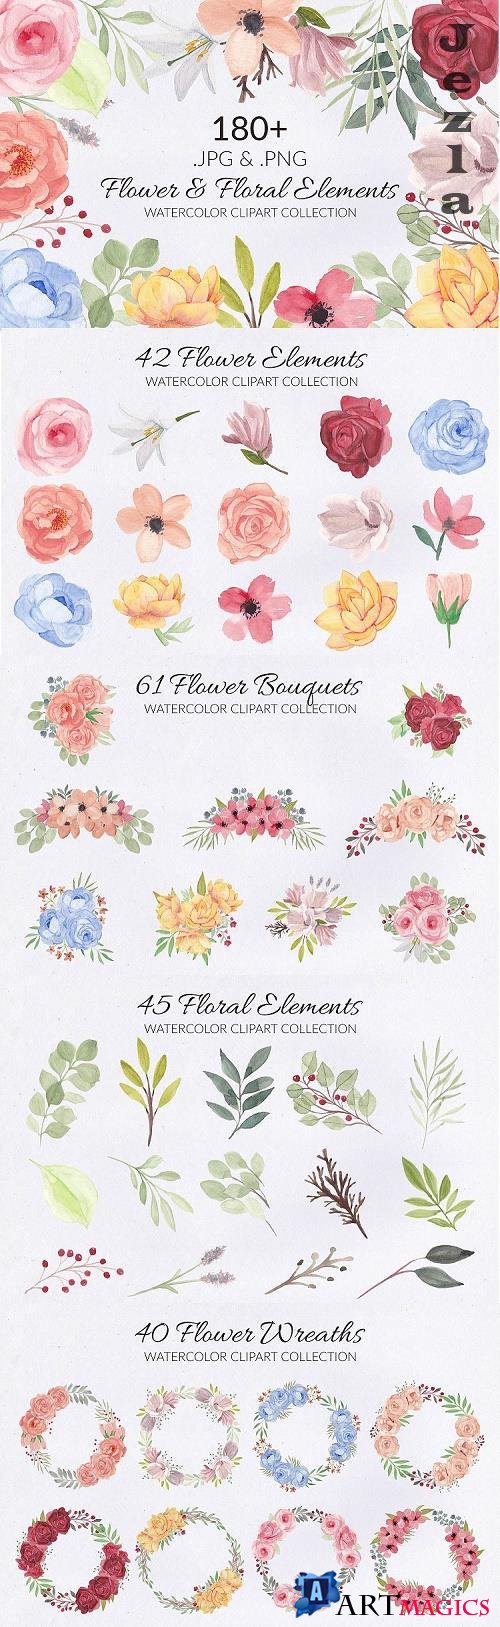 188 Flower and Floral Watercolor Illustration Clip Art - 524294